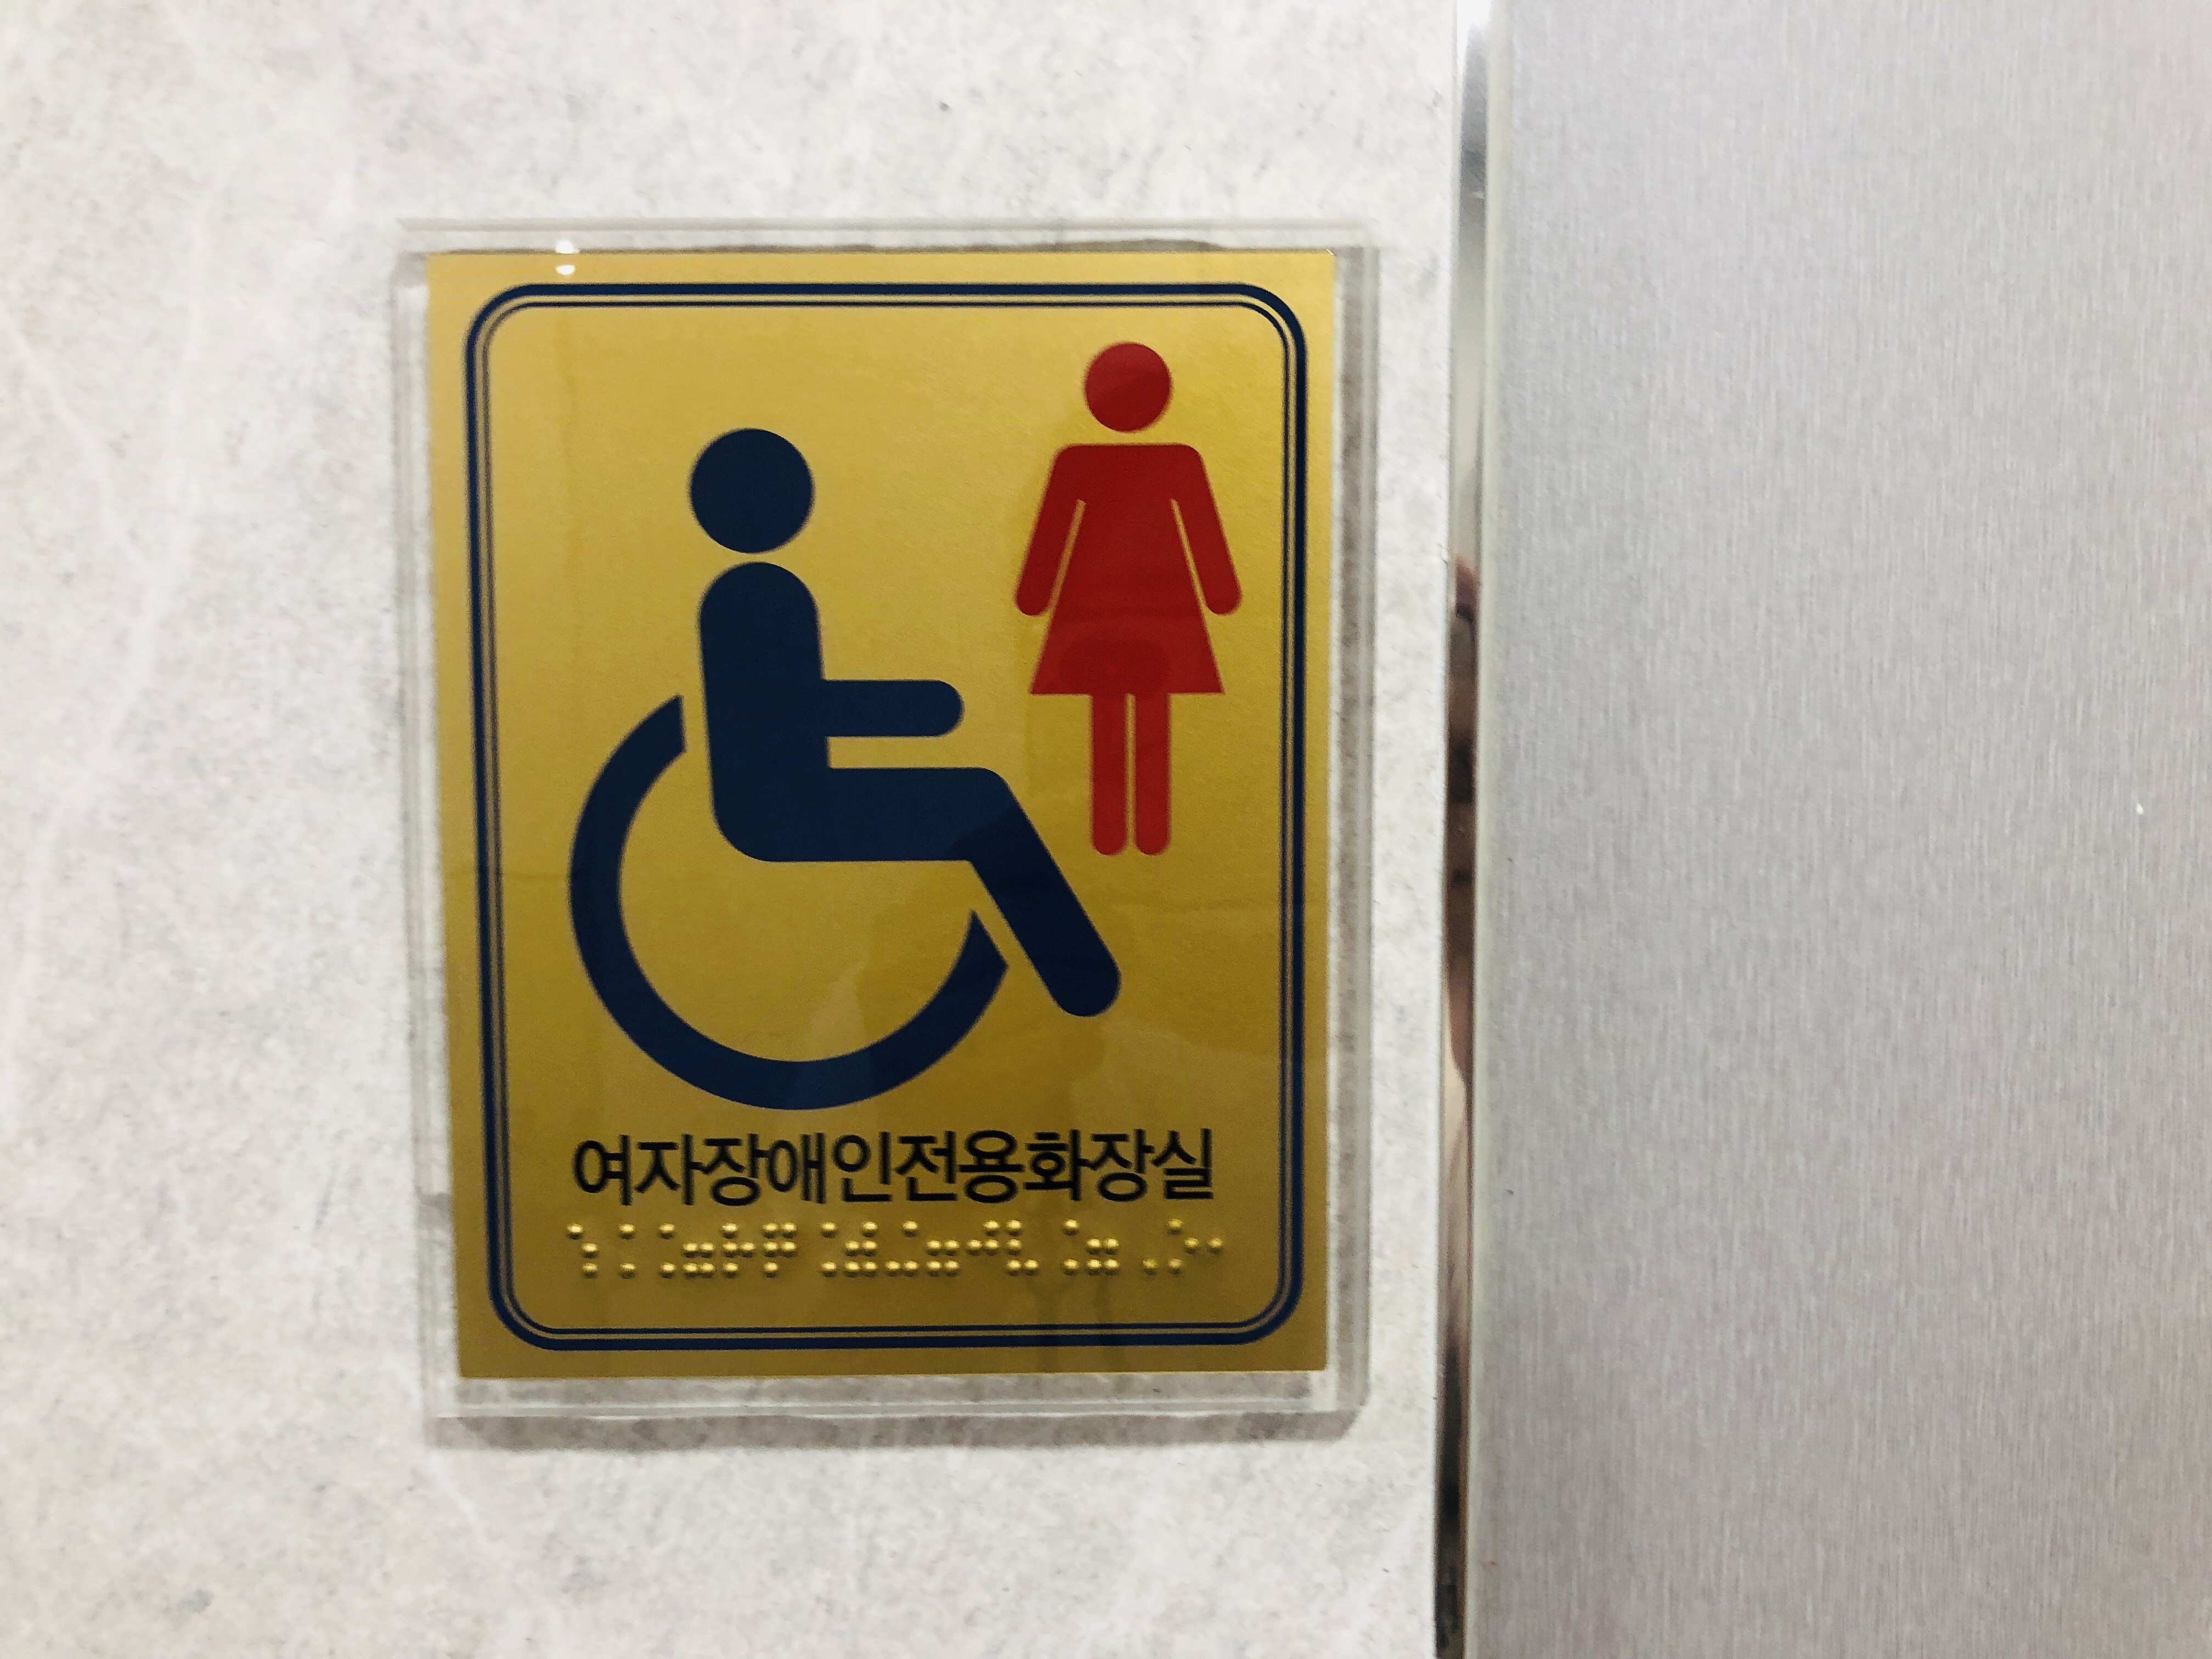 Accessible Restroom 0 : Signboard for the accessible restroom at Children's Science Center